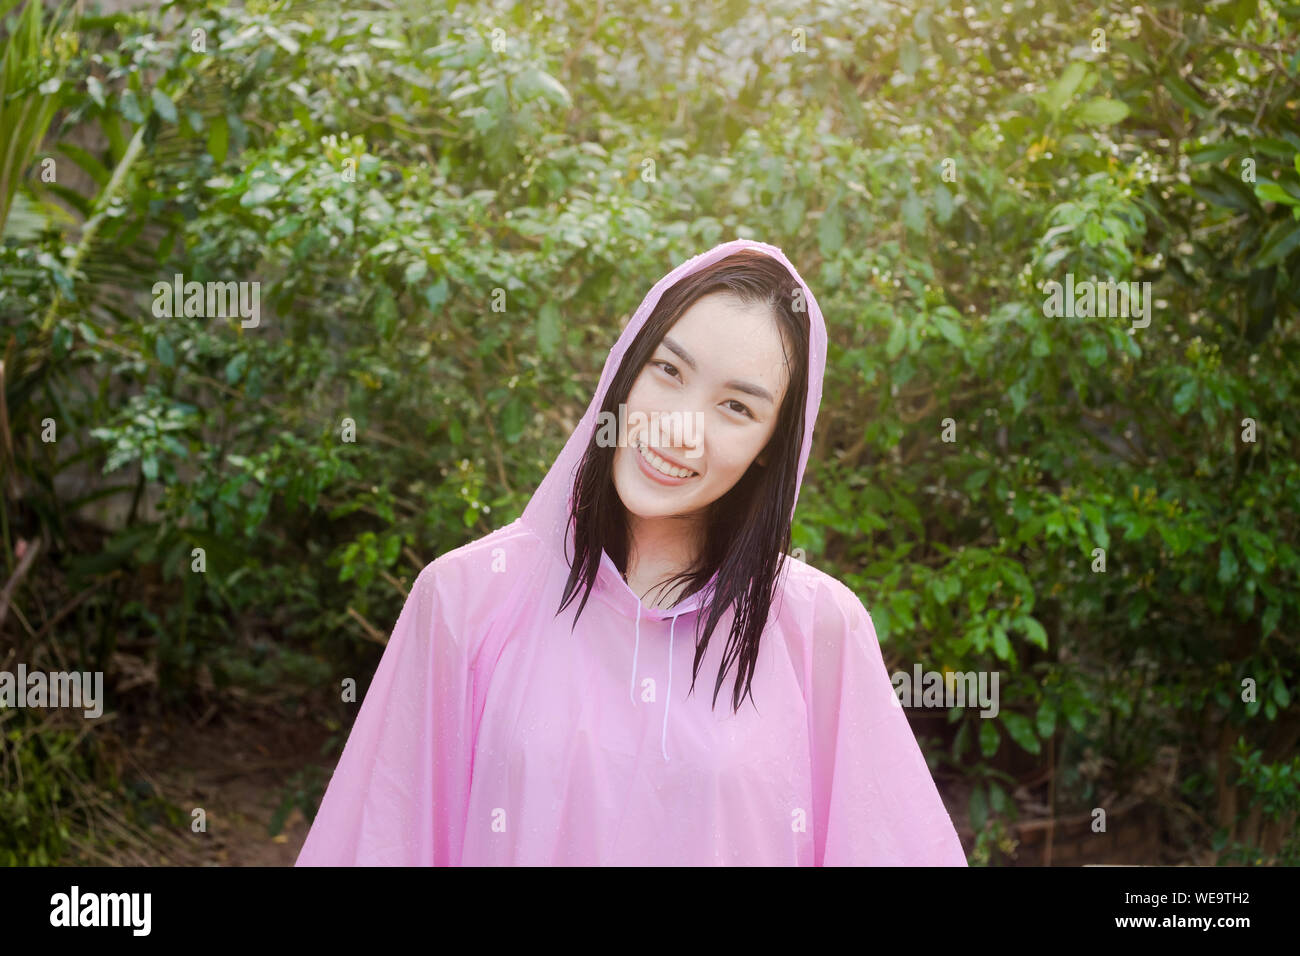 Portrait Of Young Woman In Raincoat Standing Against Trees Stock Photo